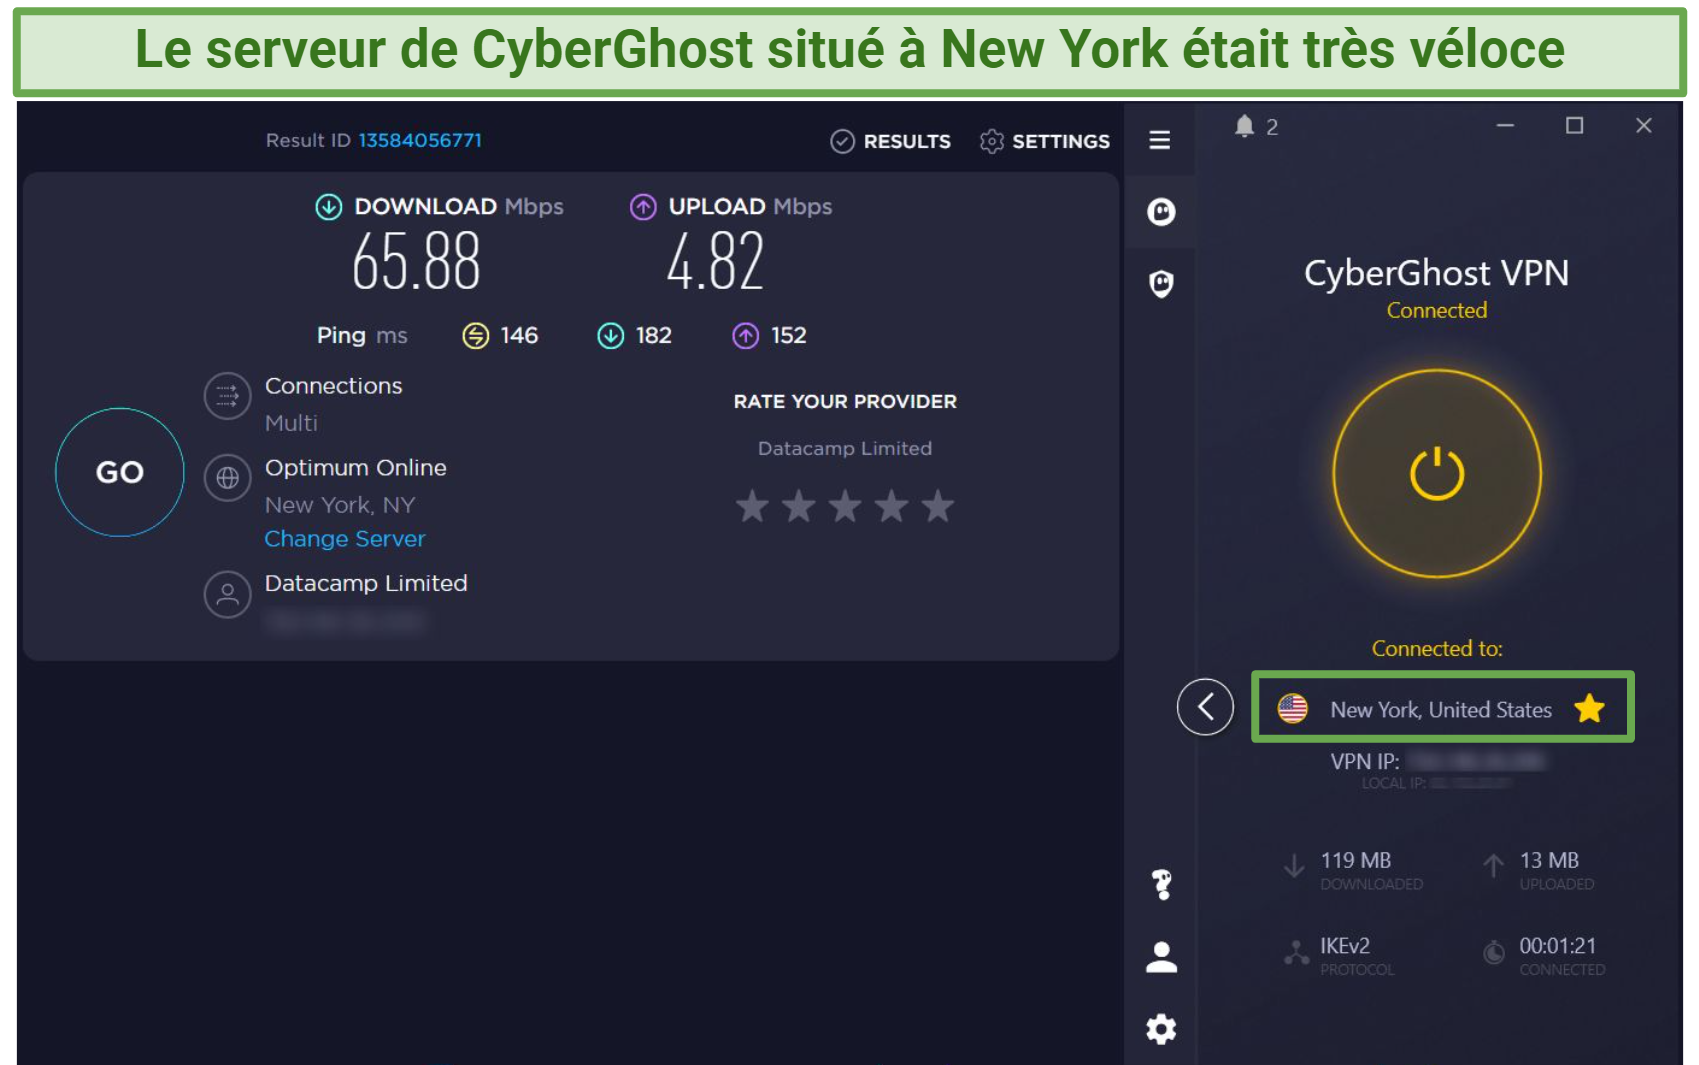 A screenshot of speed test results using CyberGhost's NY server